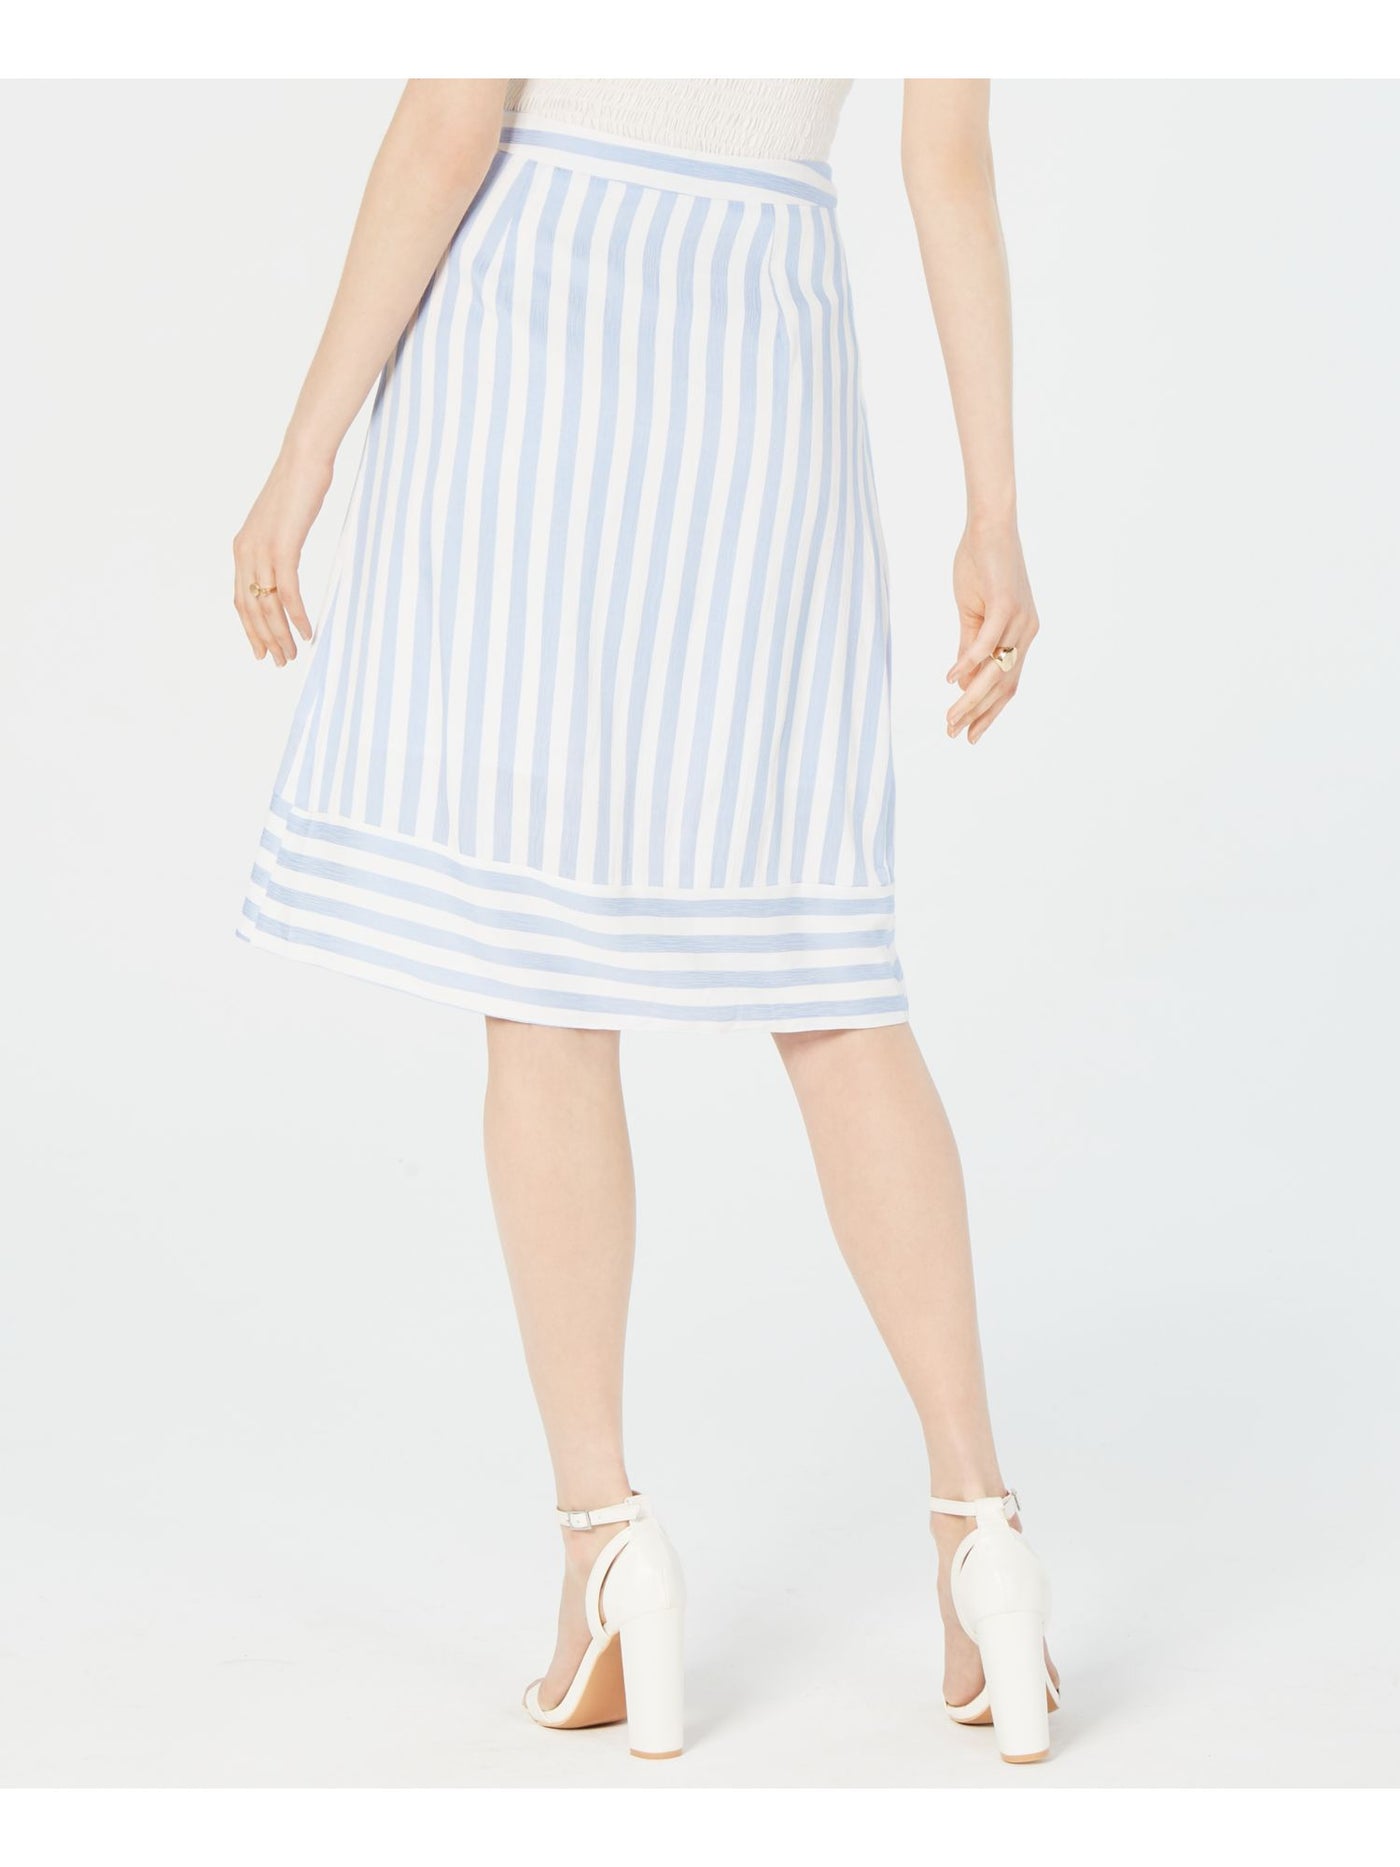 LUCY PARIS Womens Light Blue Belted Striped Knee Length Wrap Skirt Size: S